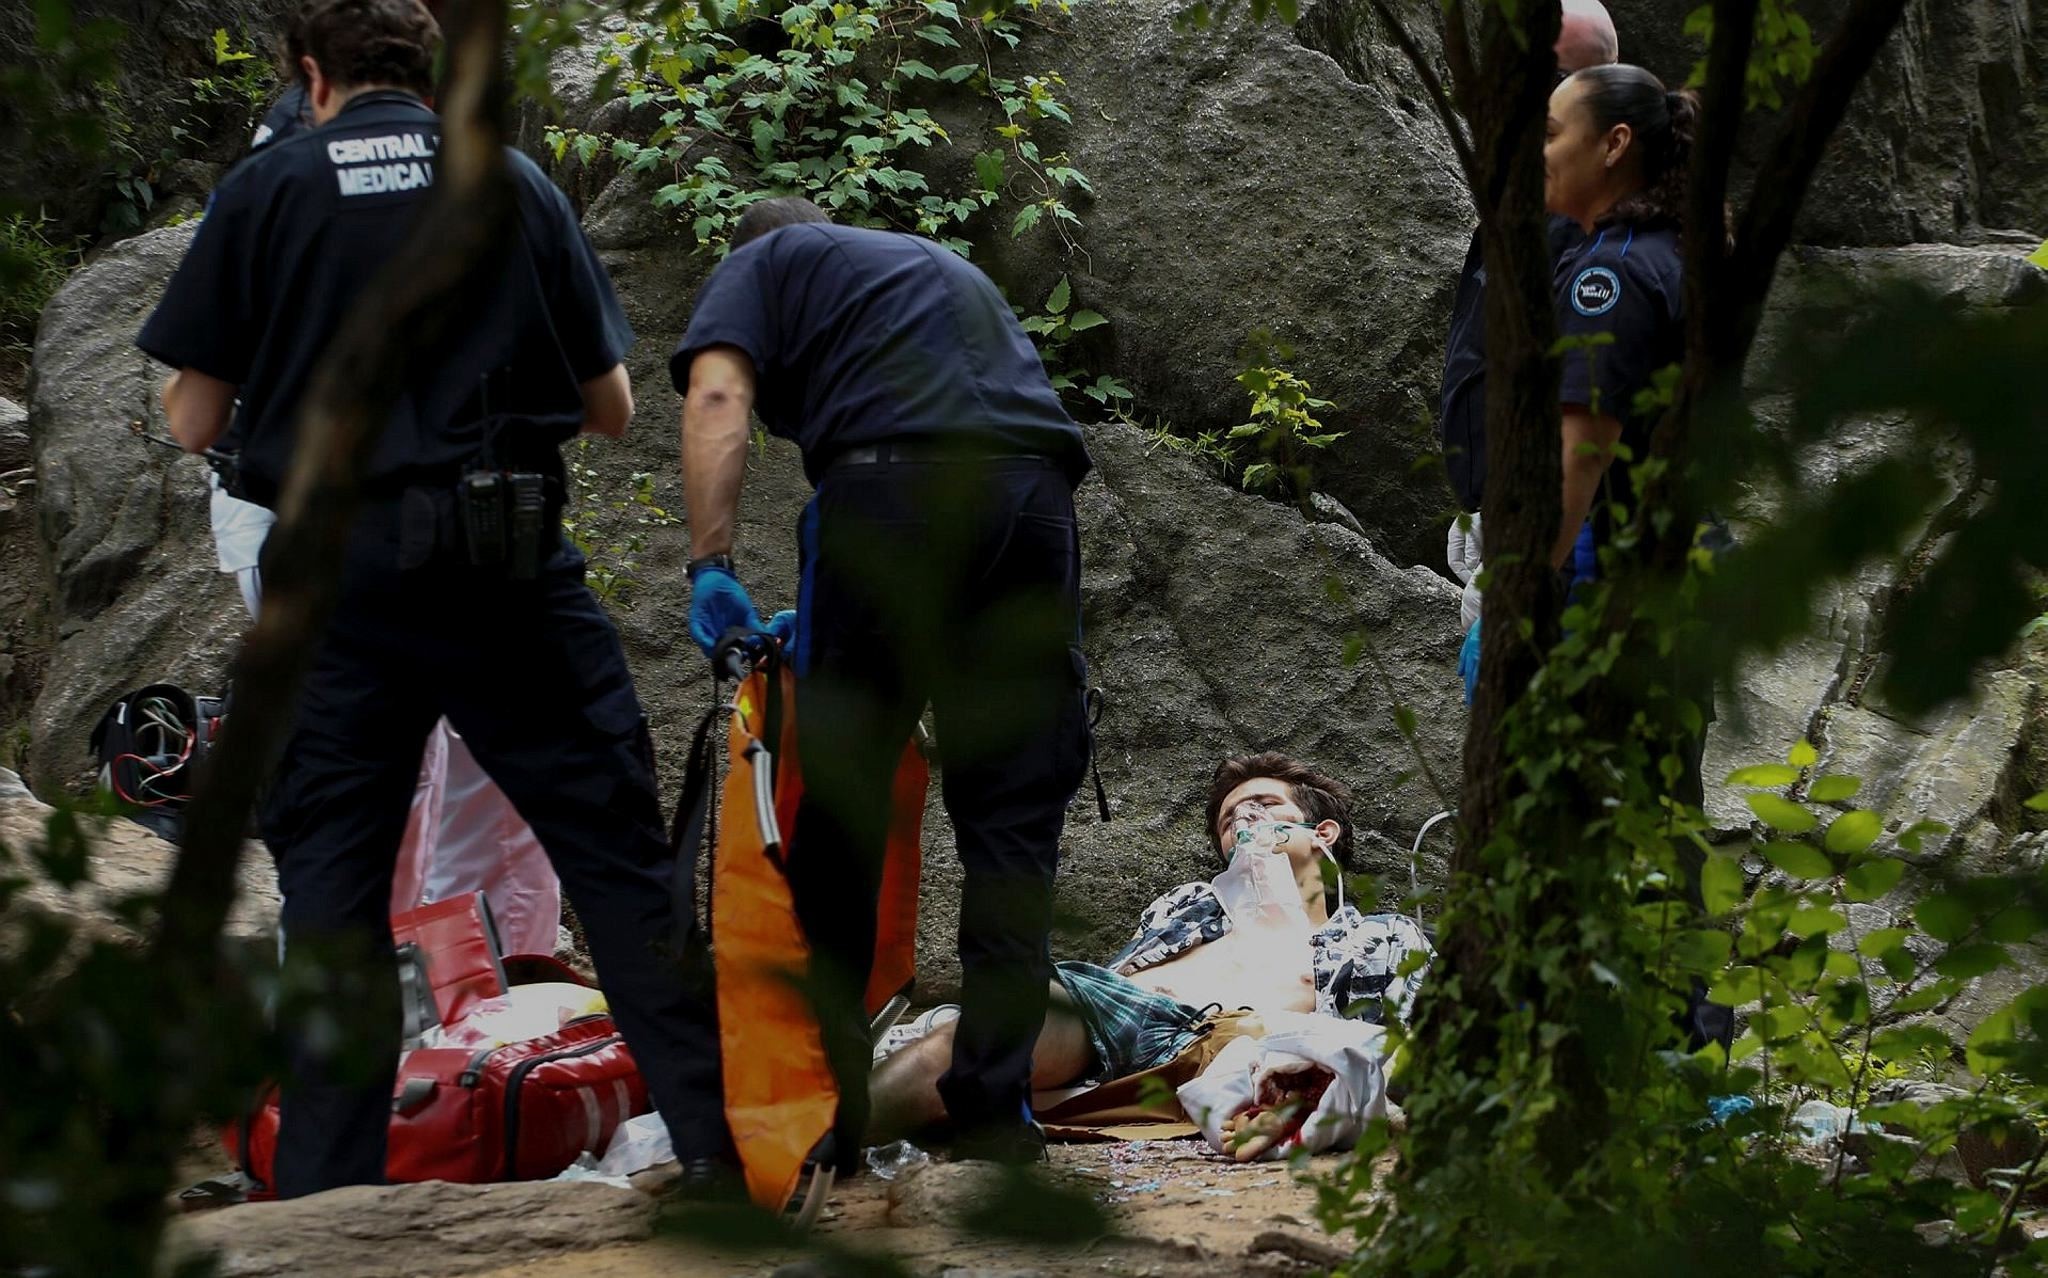 A critically injured man lies on the ground as he receives assistance after an explosion was detonated at Central Park in New York on July 3, 2016. (AFP Photo)